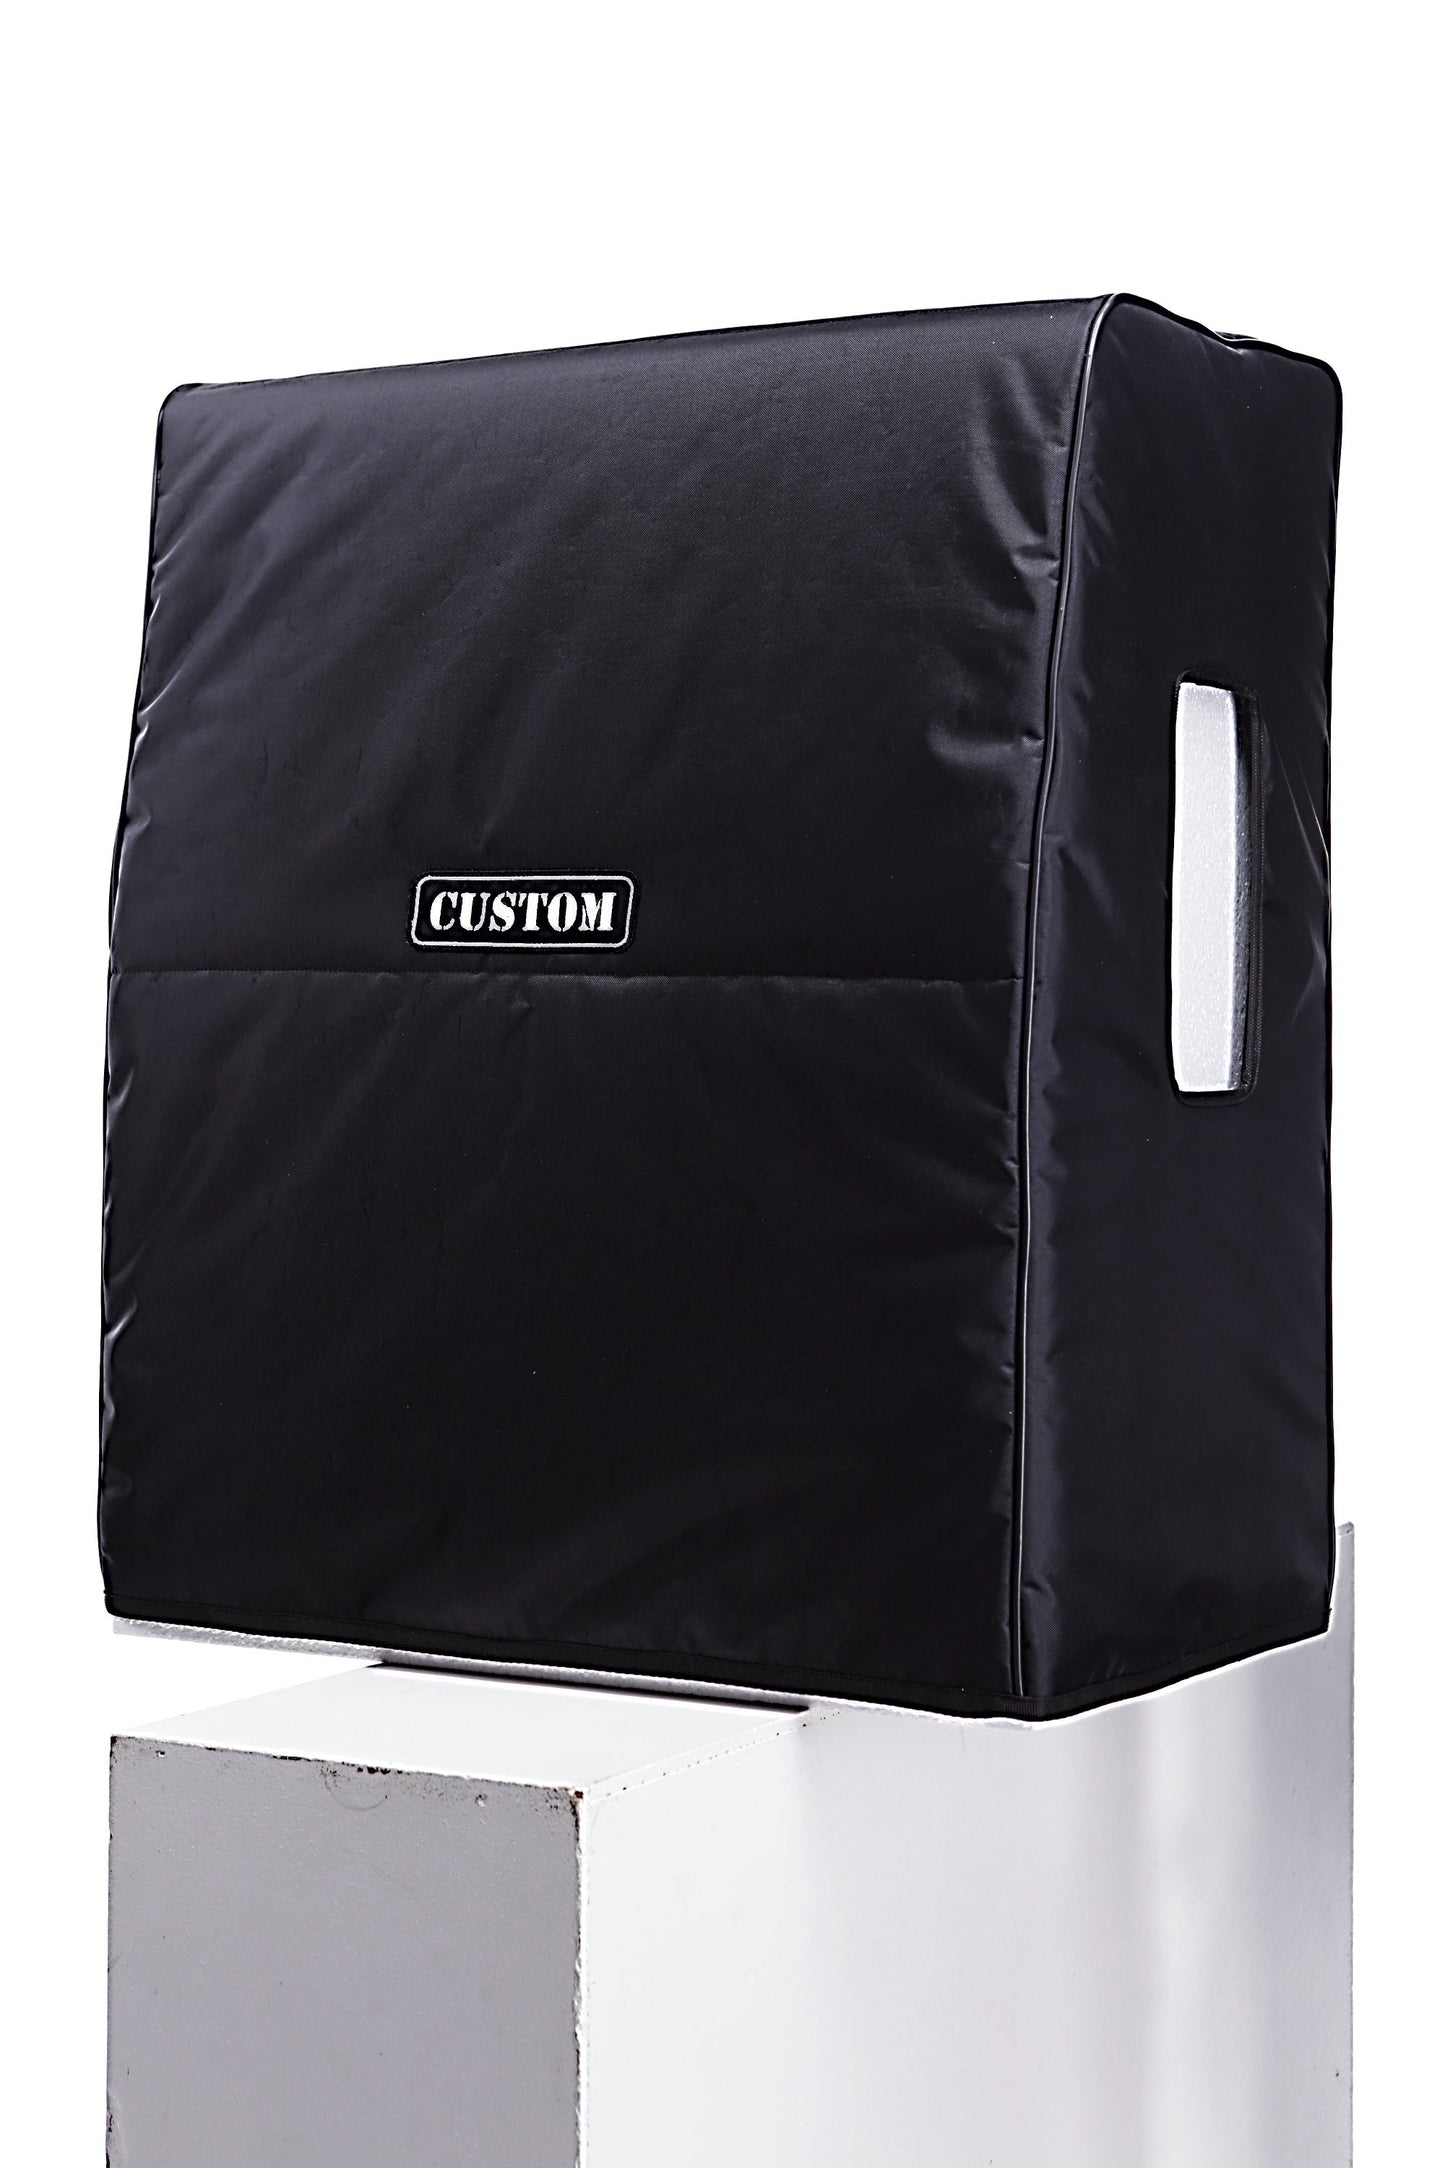 Custom padded cover for SOLDANO 412 Angled Cabinet 4x12" Extension Cabinet Black